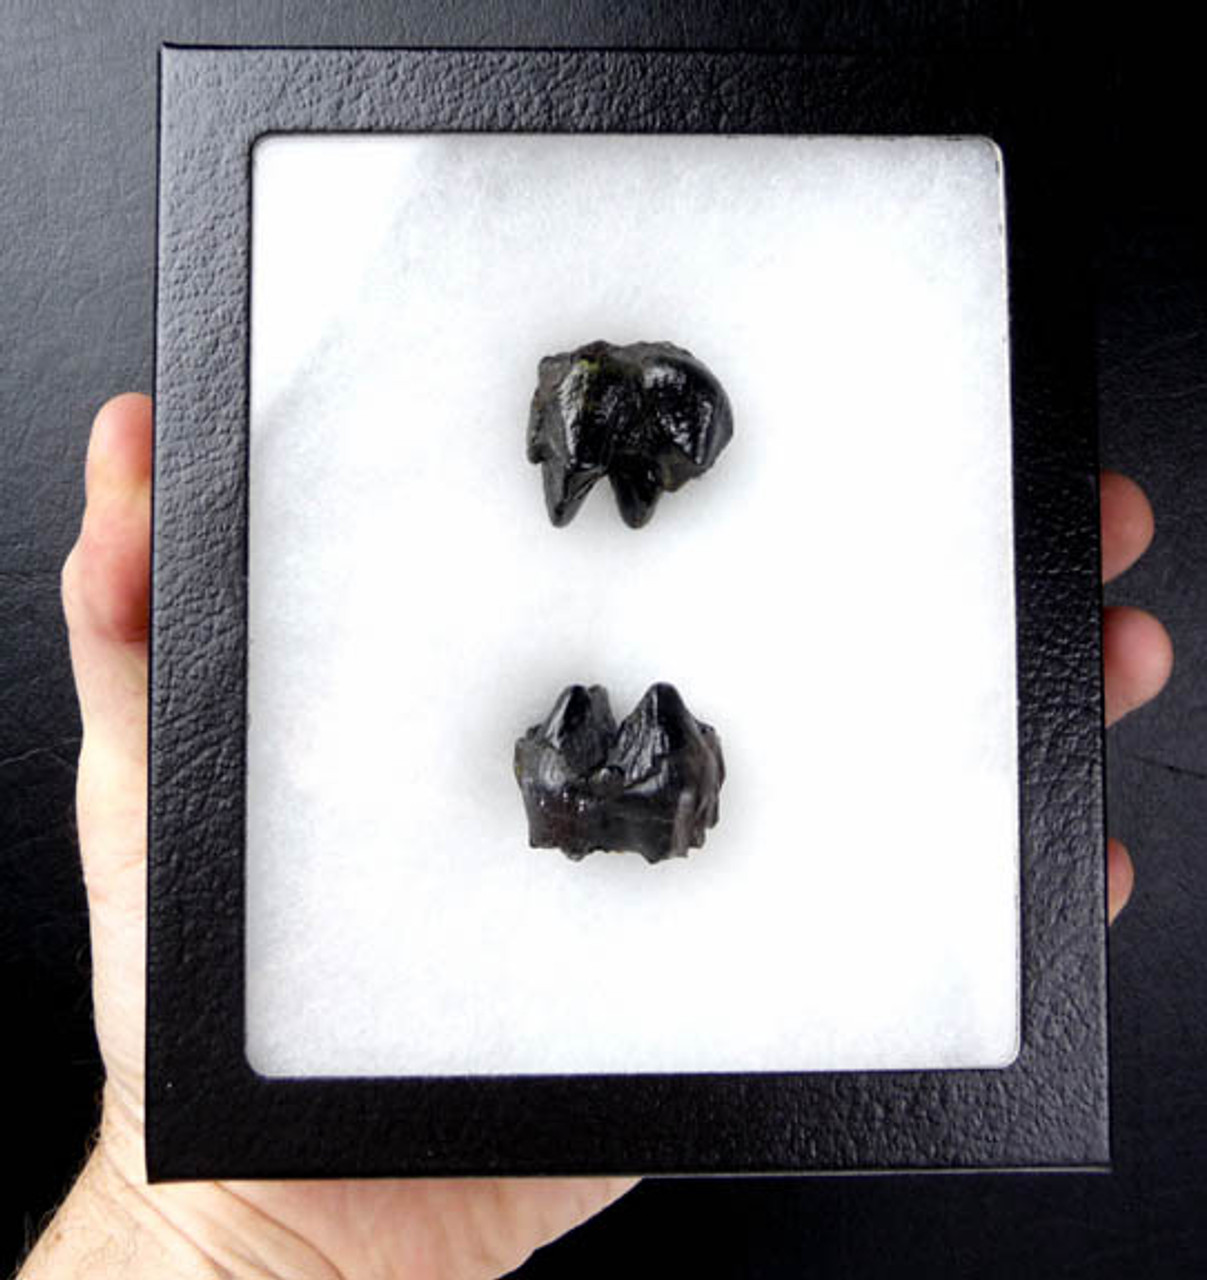 TWO BABY MASTODON FOSSIL UPPER AND LOWER MOLAR TEETH FROM SAME MASTODON *LM15-020